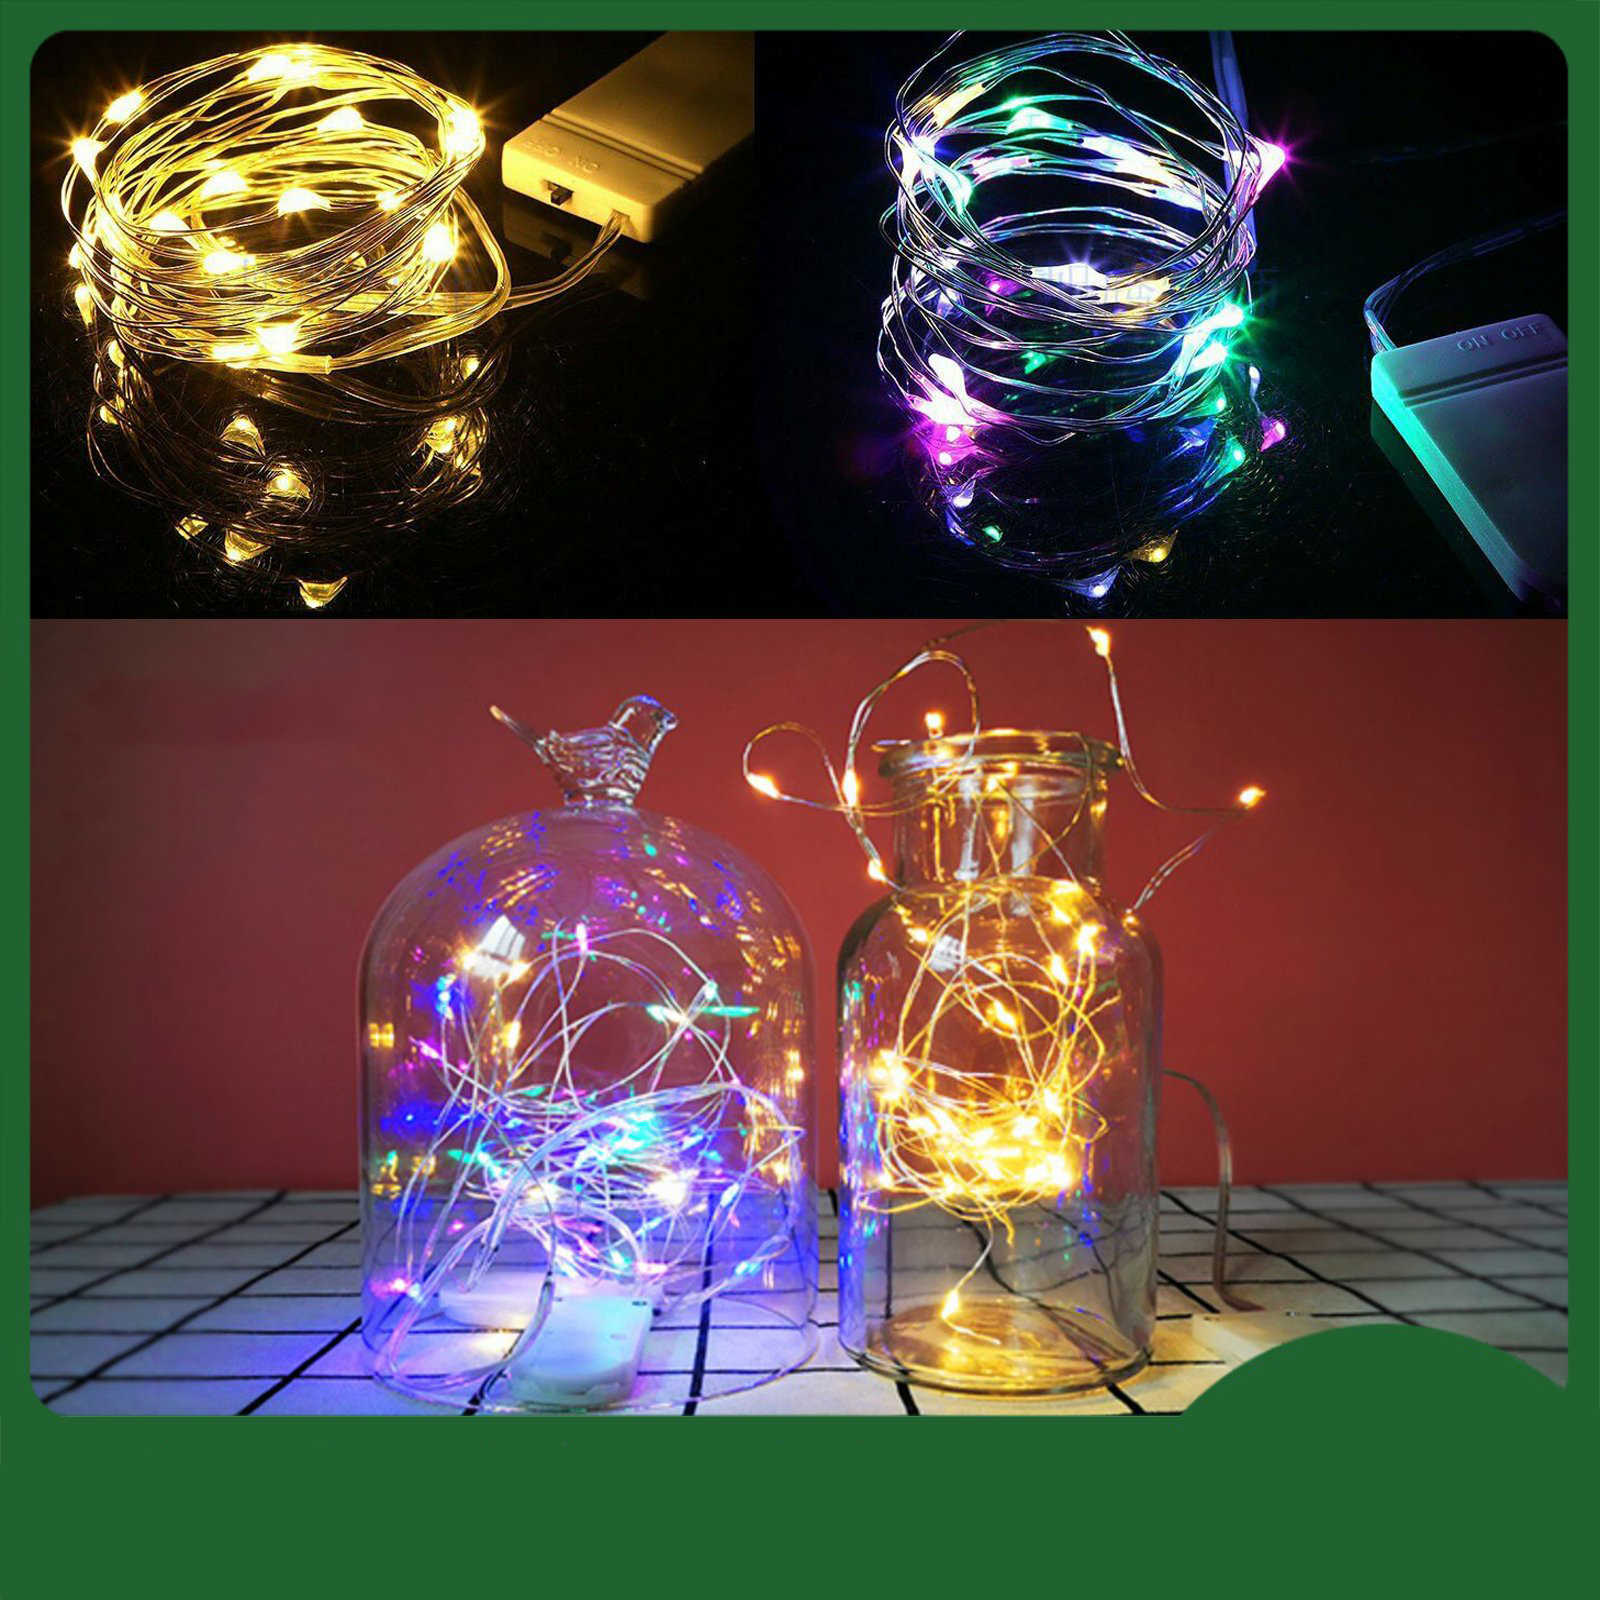 Details about  / 2M-6M LED Copper Wire Fairy String Light Battery Powered Holiday Wedding Decor